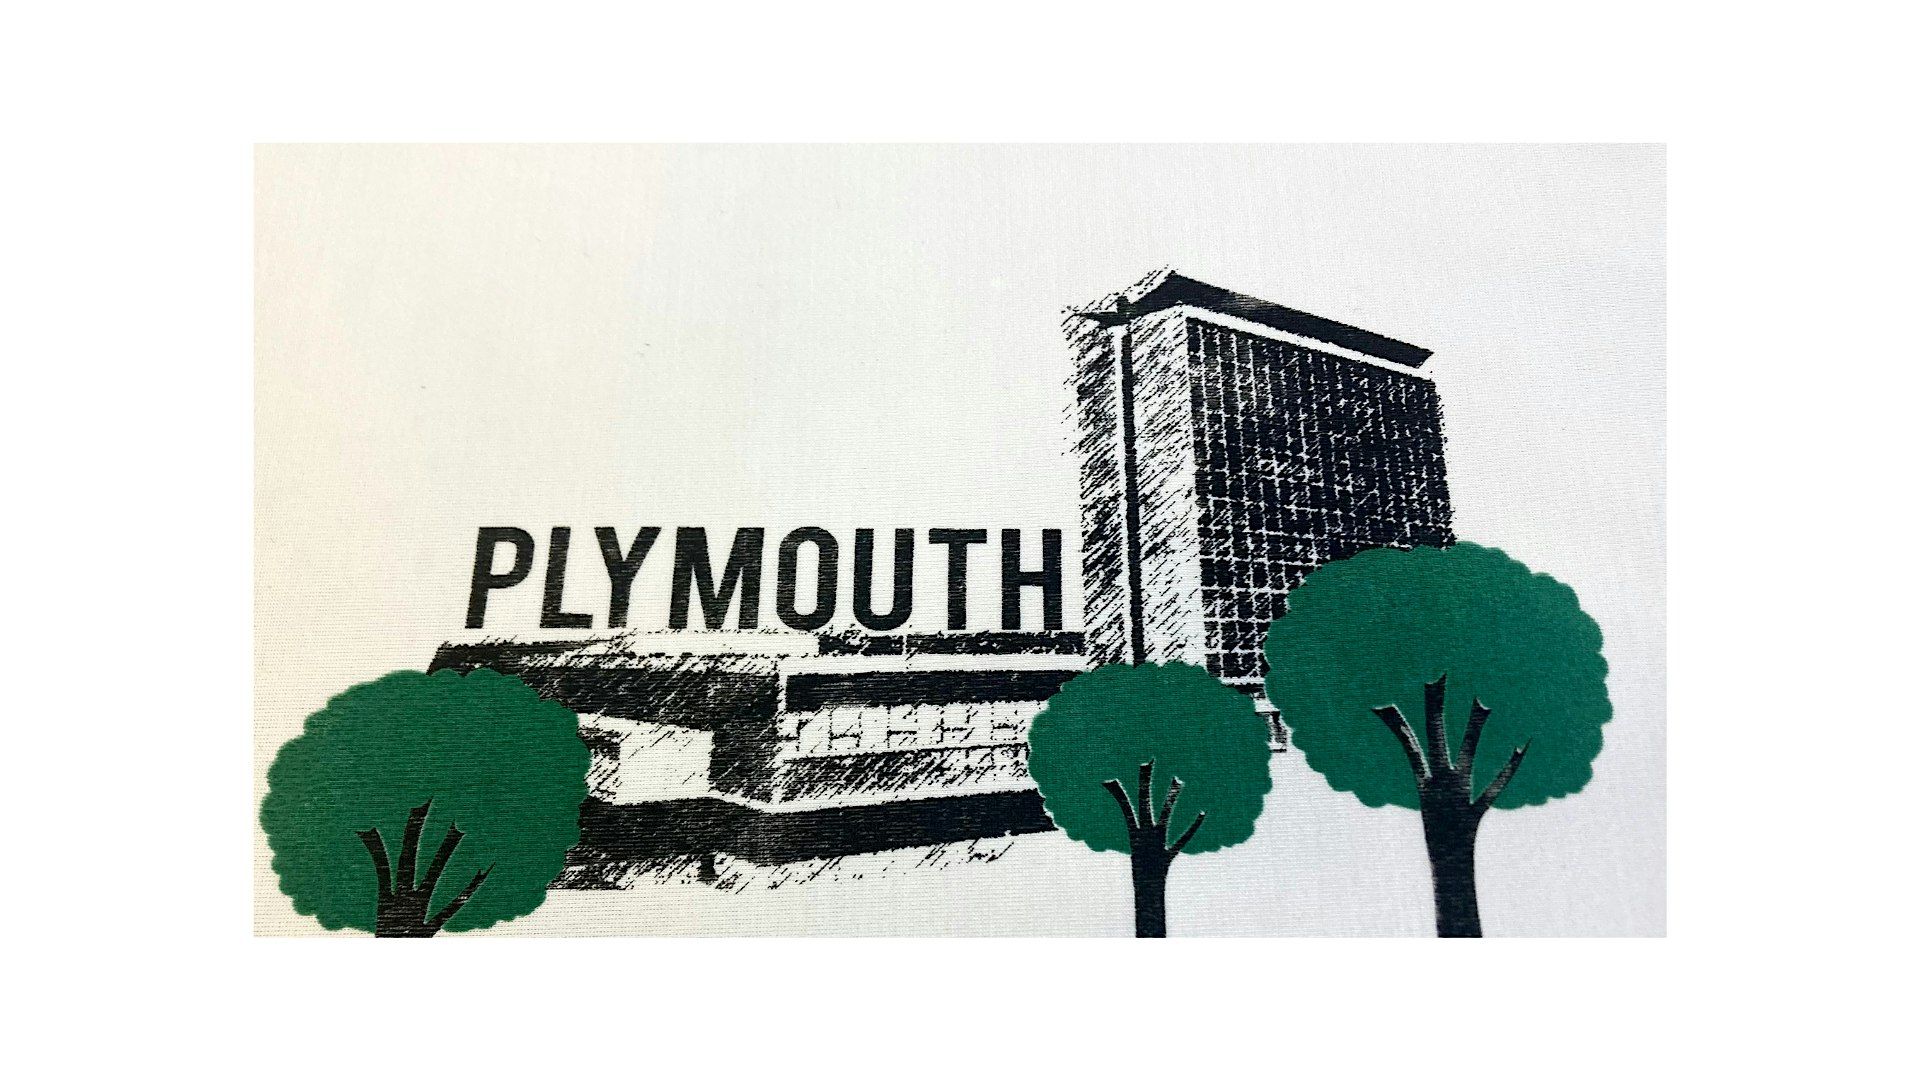 Open Call for Artists to enter Plymouth’s Urban Tree Art Exhibition May 24